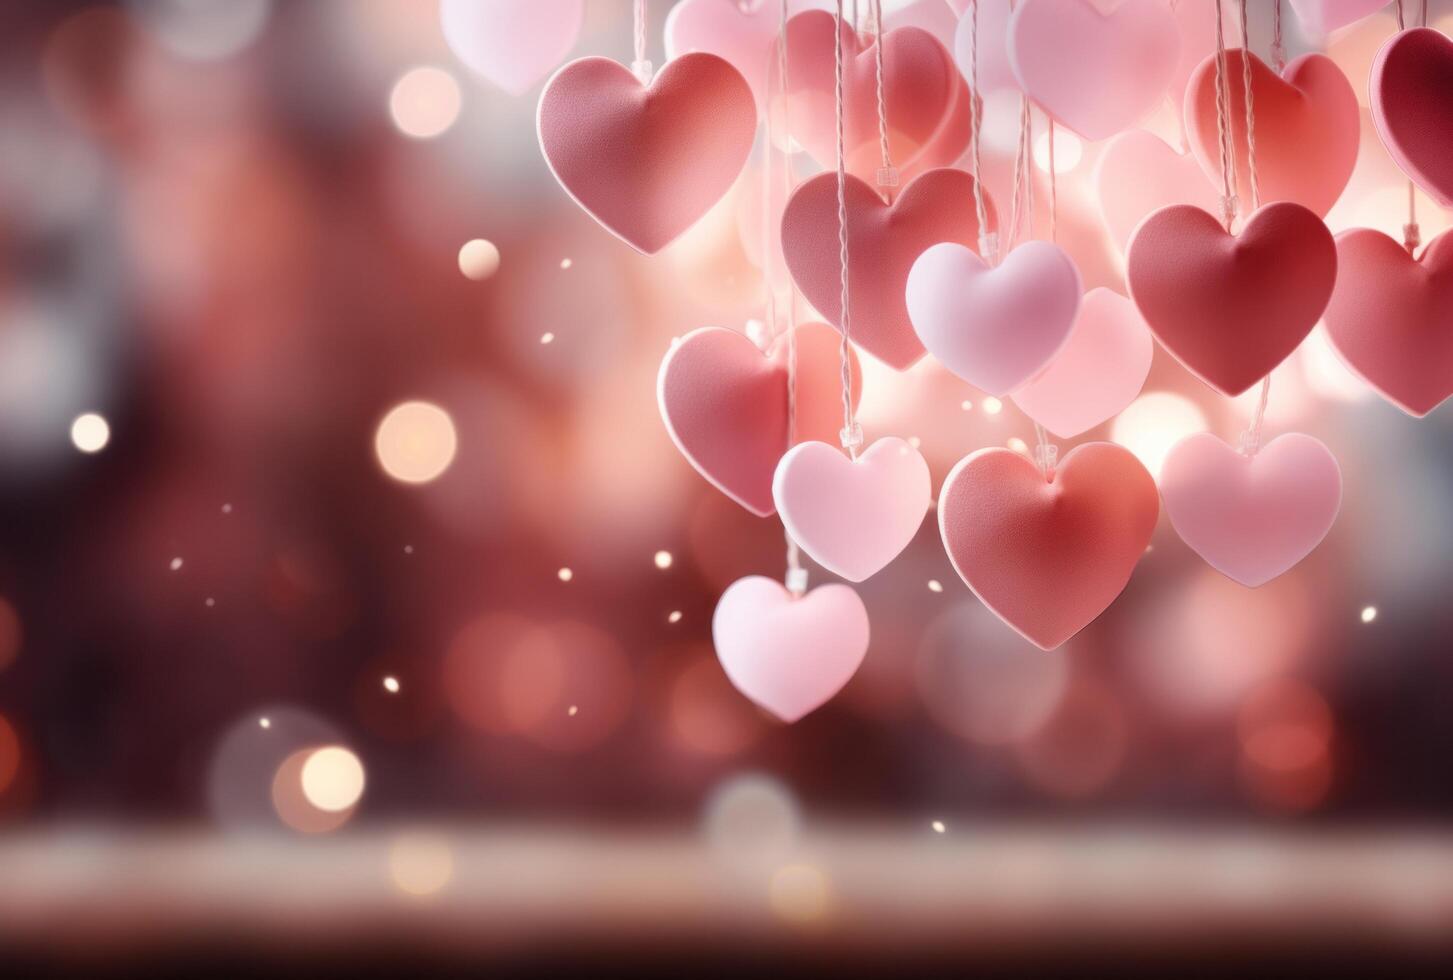 AI generated pastel pink and white heart shapes with blurred background, photo